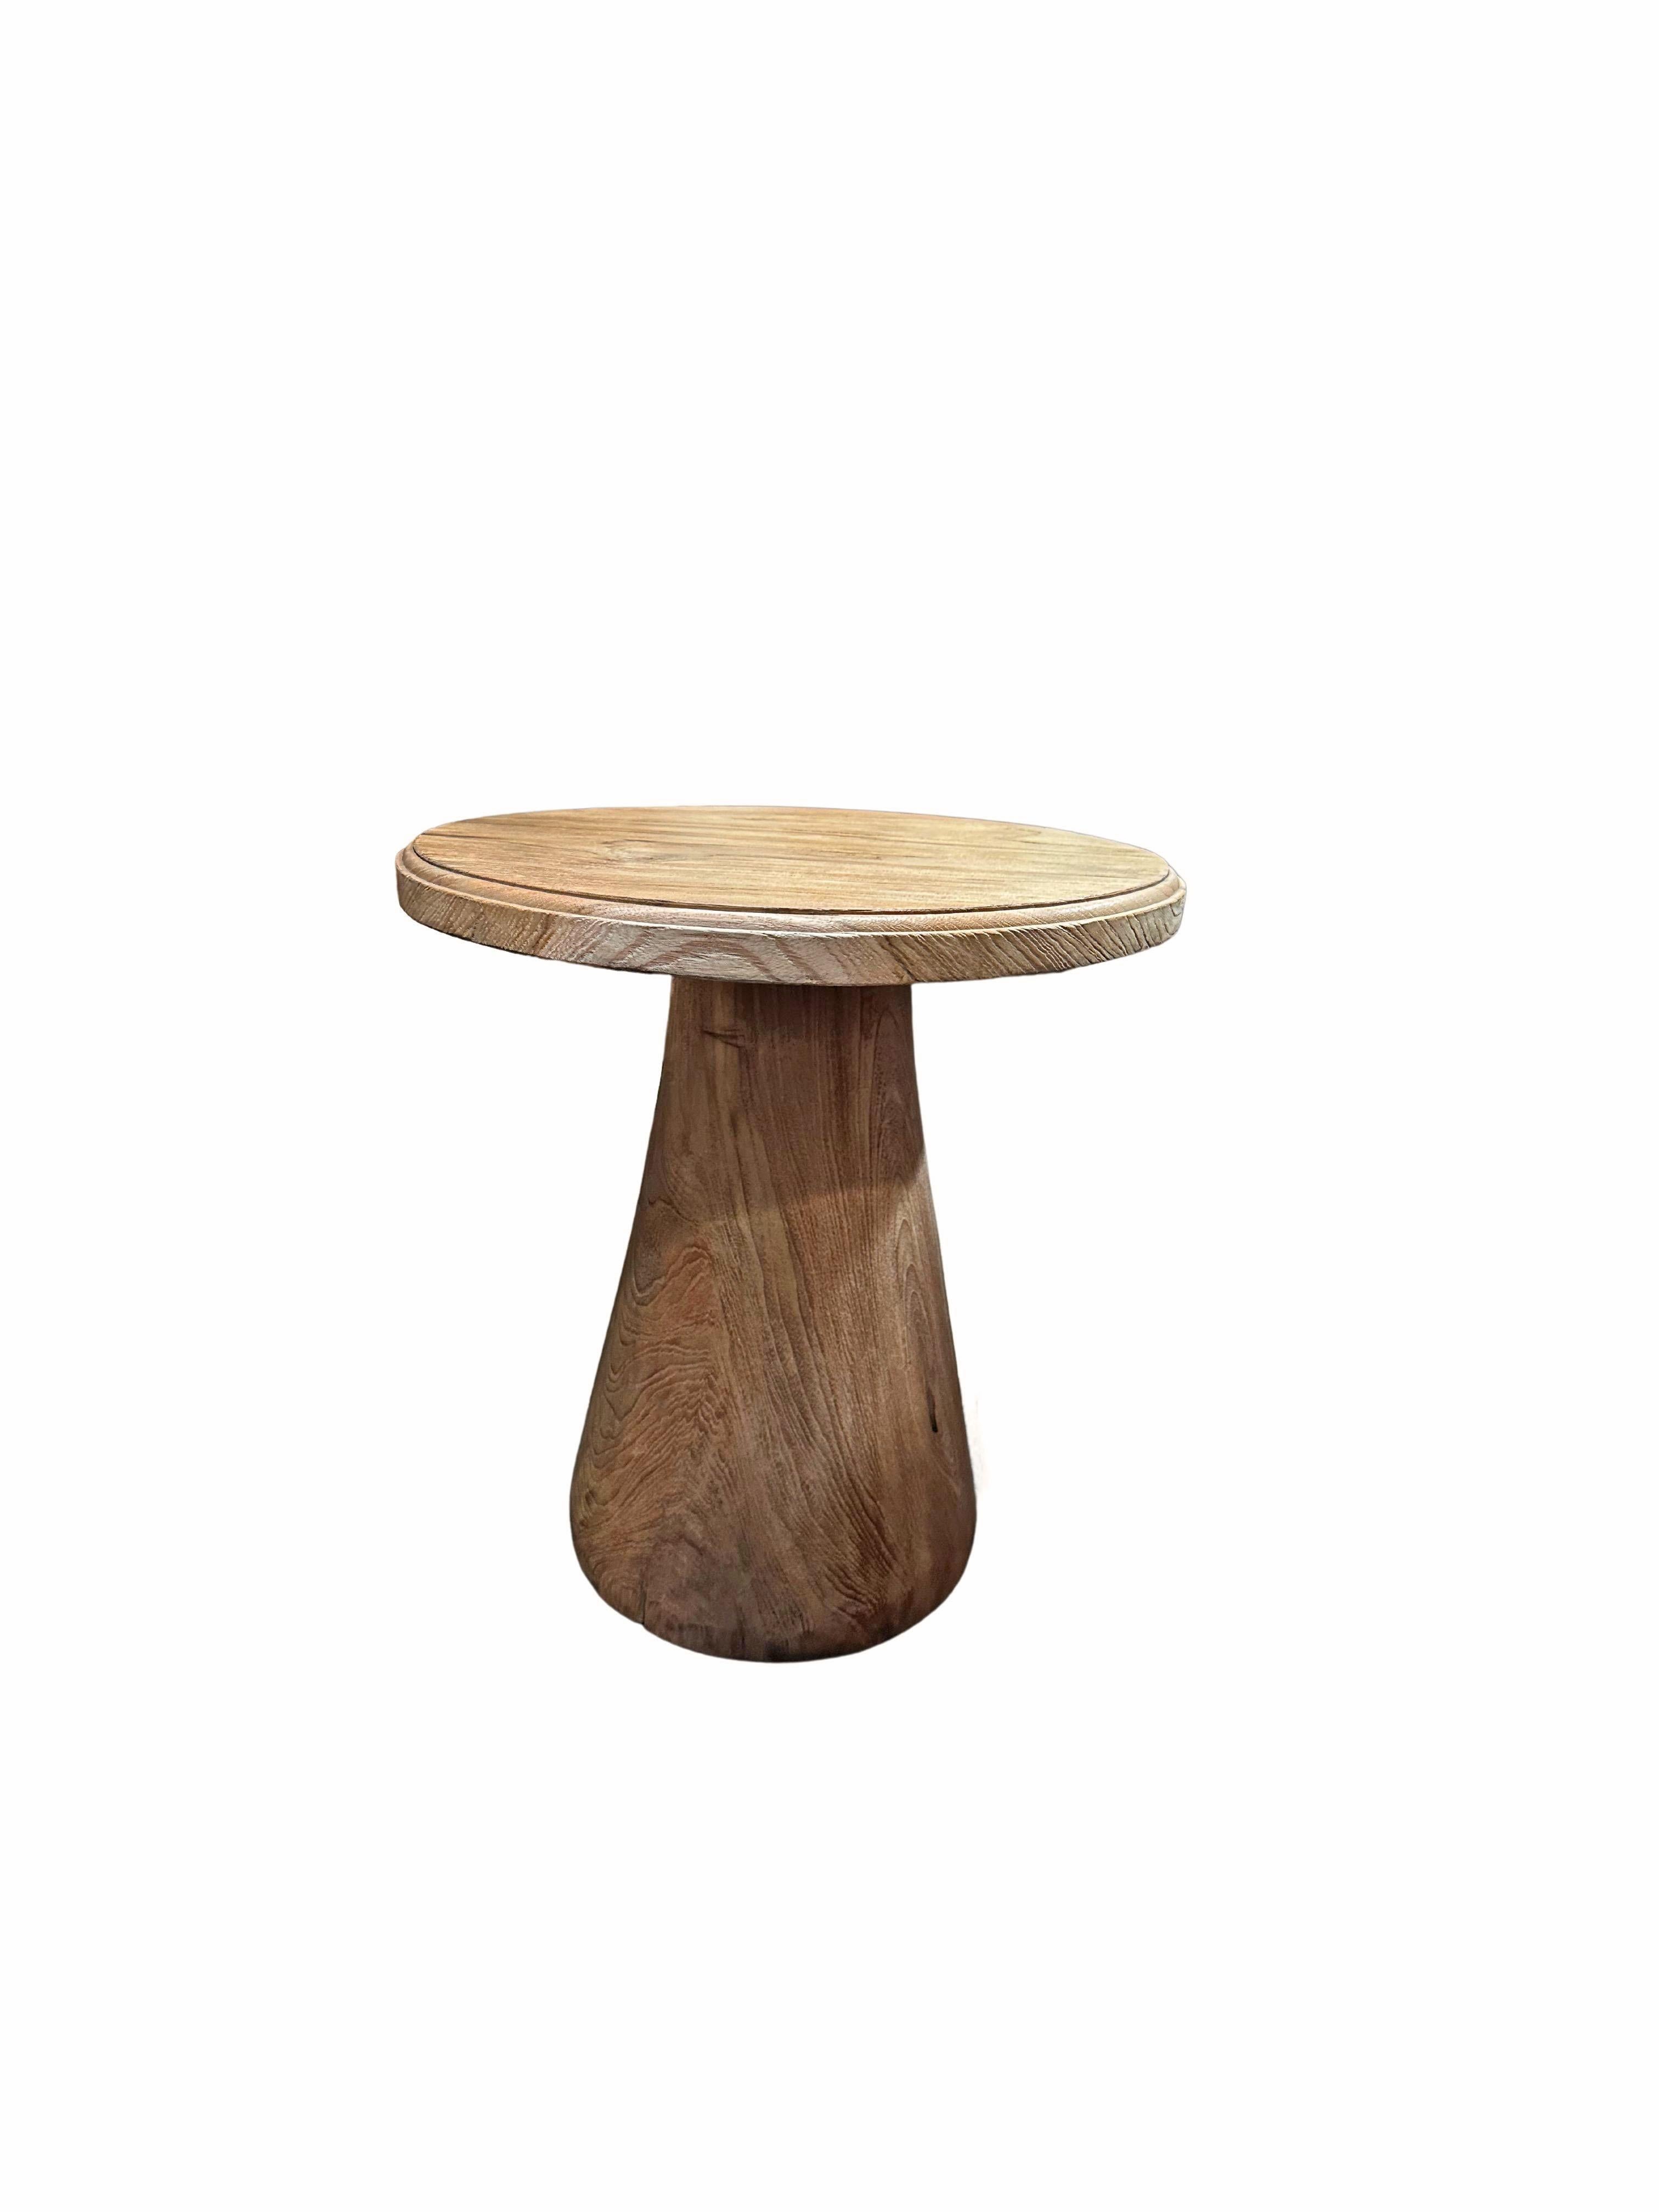 Organic Modern Sculptural Round Table Crafted from Teak Wood, Natural Finish For Sale